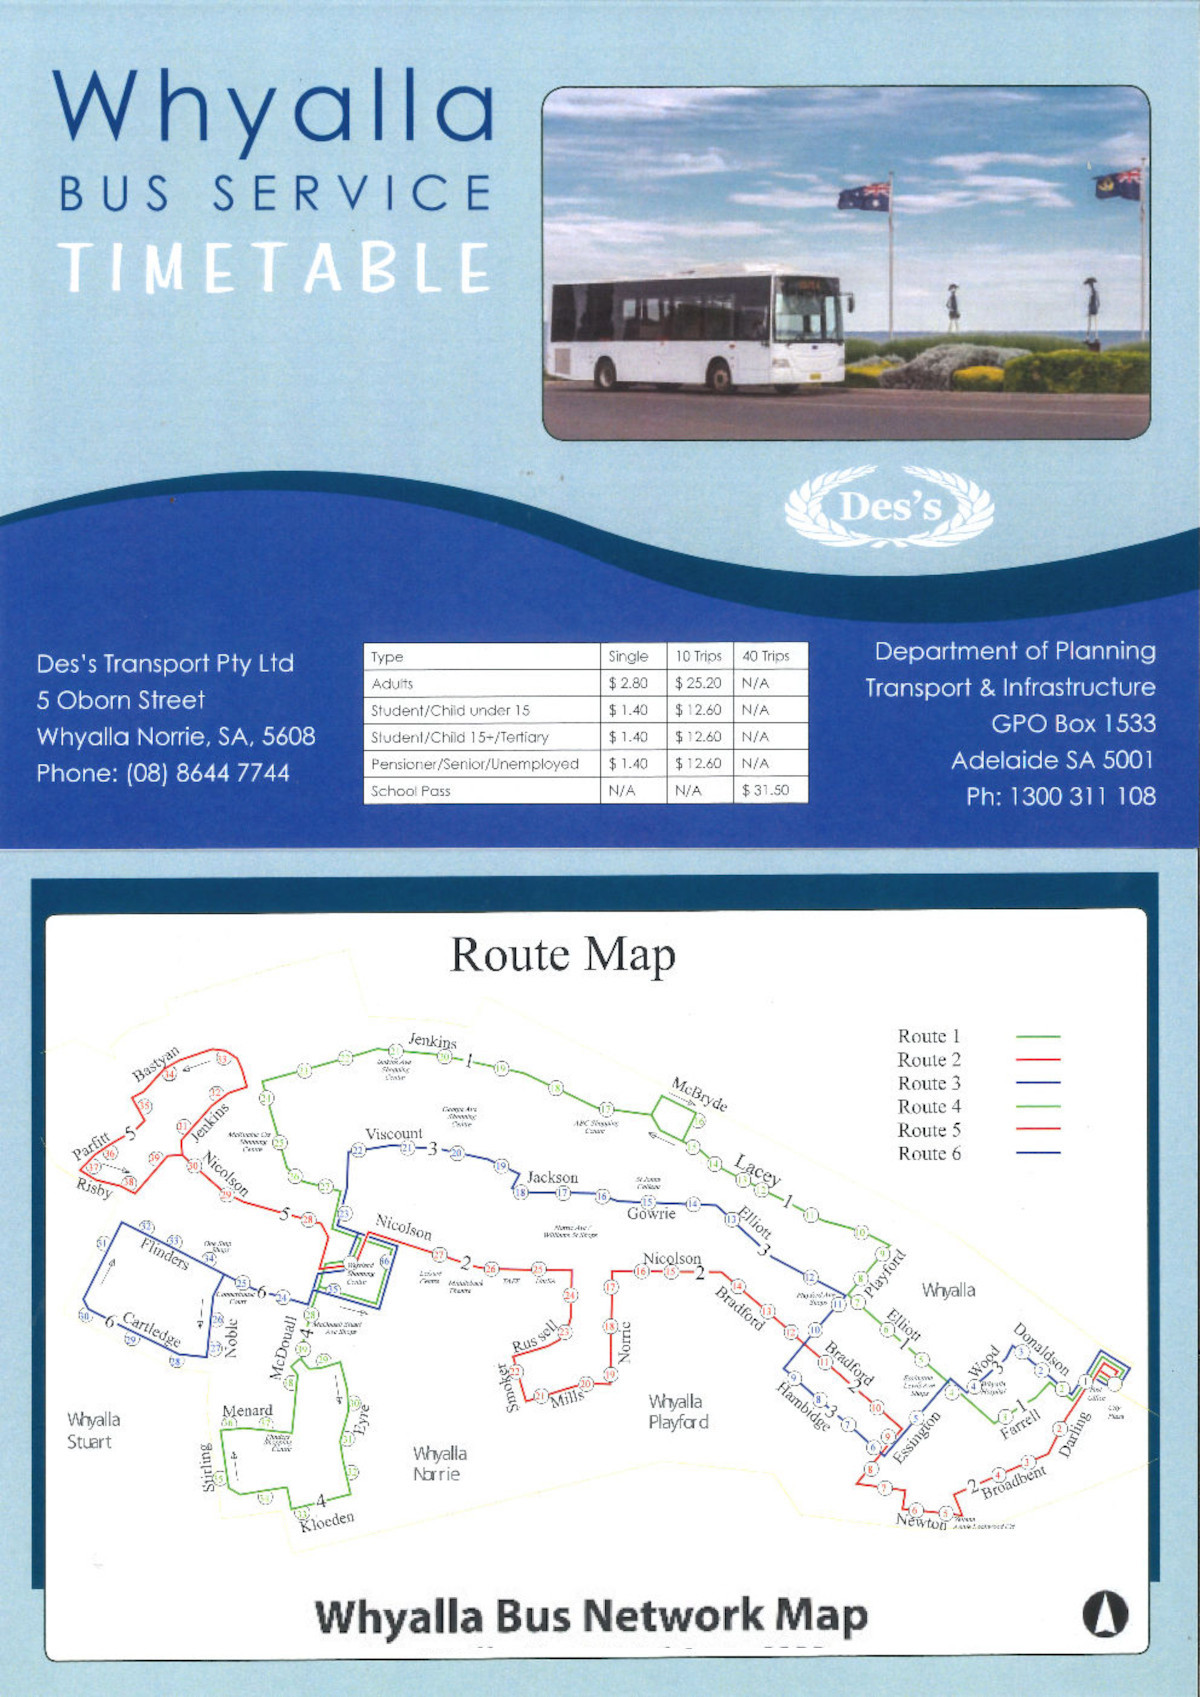 Des's Transport - Whyalla Route Service Schedule